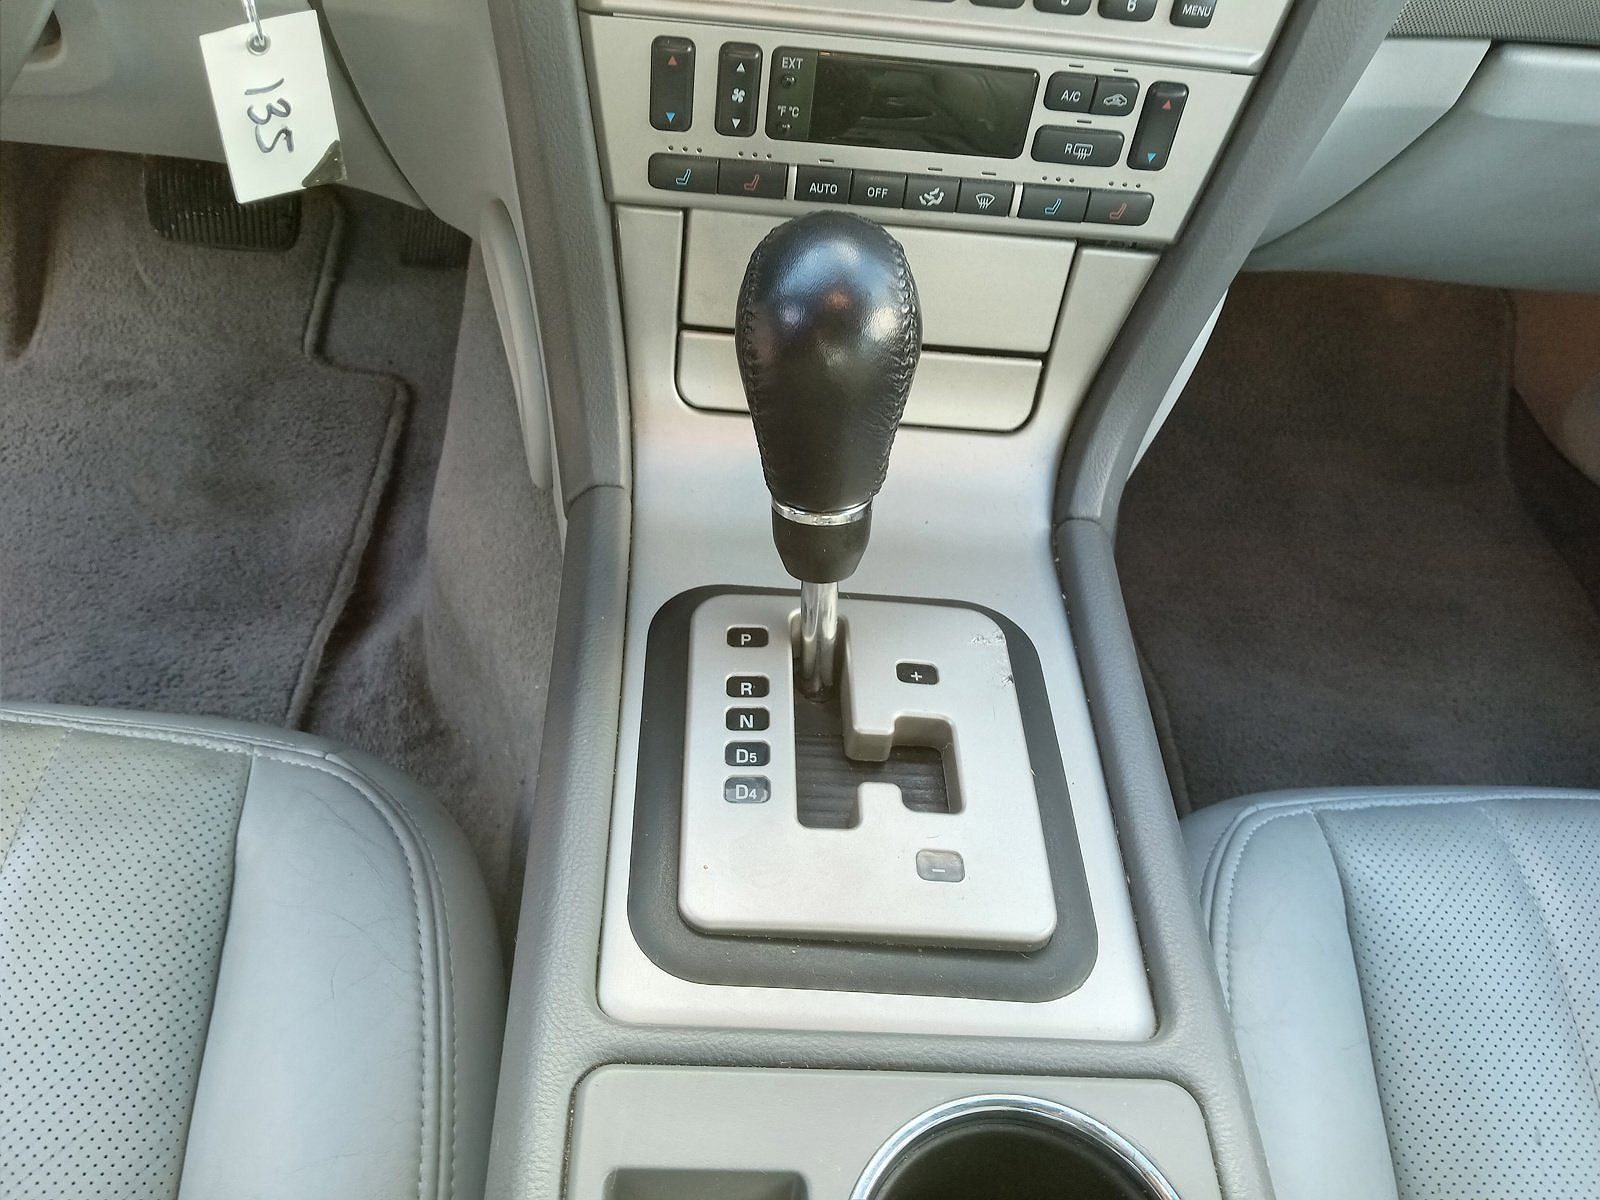 2004 Lincoln LS Sport image 9